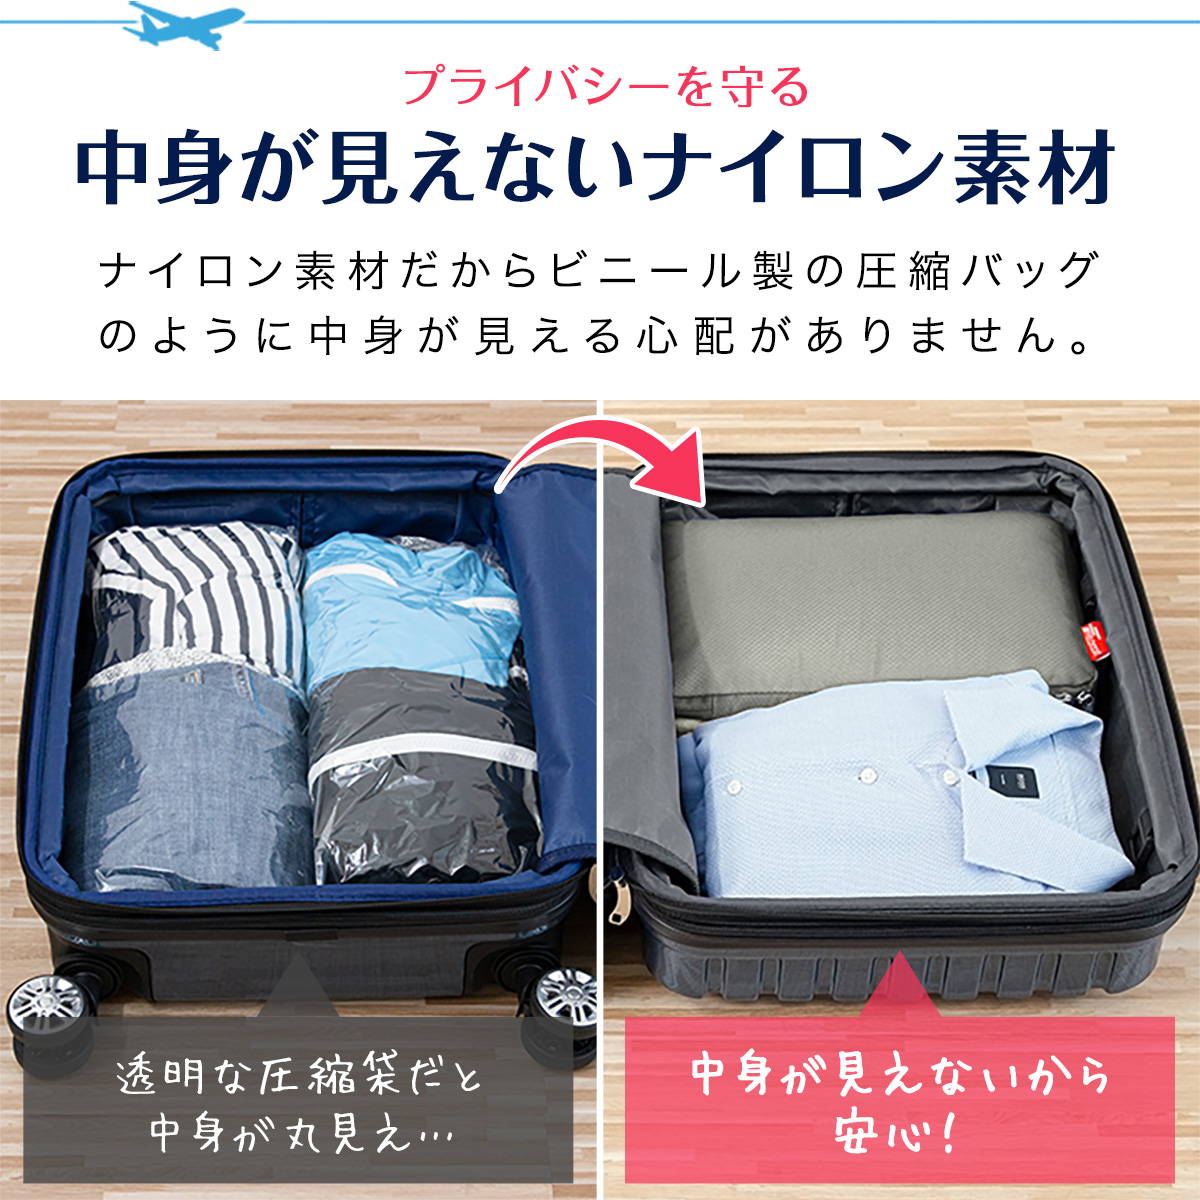 【SALE特価1,815円9/11（月）14:59まで】旅行 圧縮バッグ 旅行用圧縮袋 トラベルポーチ 圧縮ポーチ 圧縮パック 収納ポーチ  収納バッグ 圧縮袋 服 衣類 衣類収納 仕分けケース バッグ ポーチ スーツケース 整理 海外旅行 旅行グッズ ☆[送料無料] マックス ...